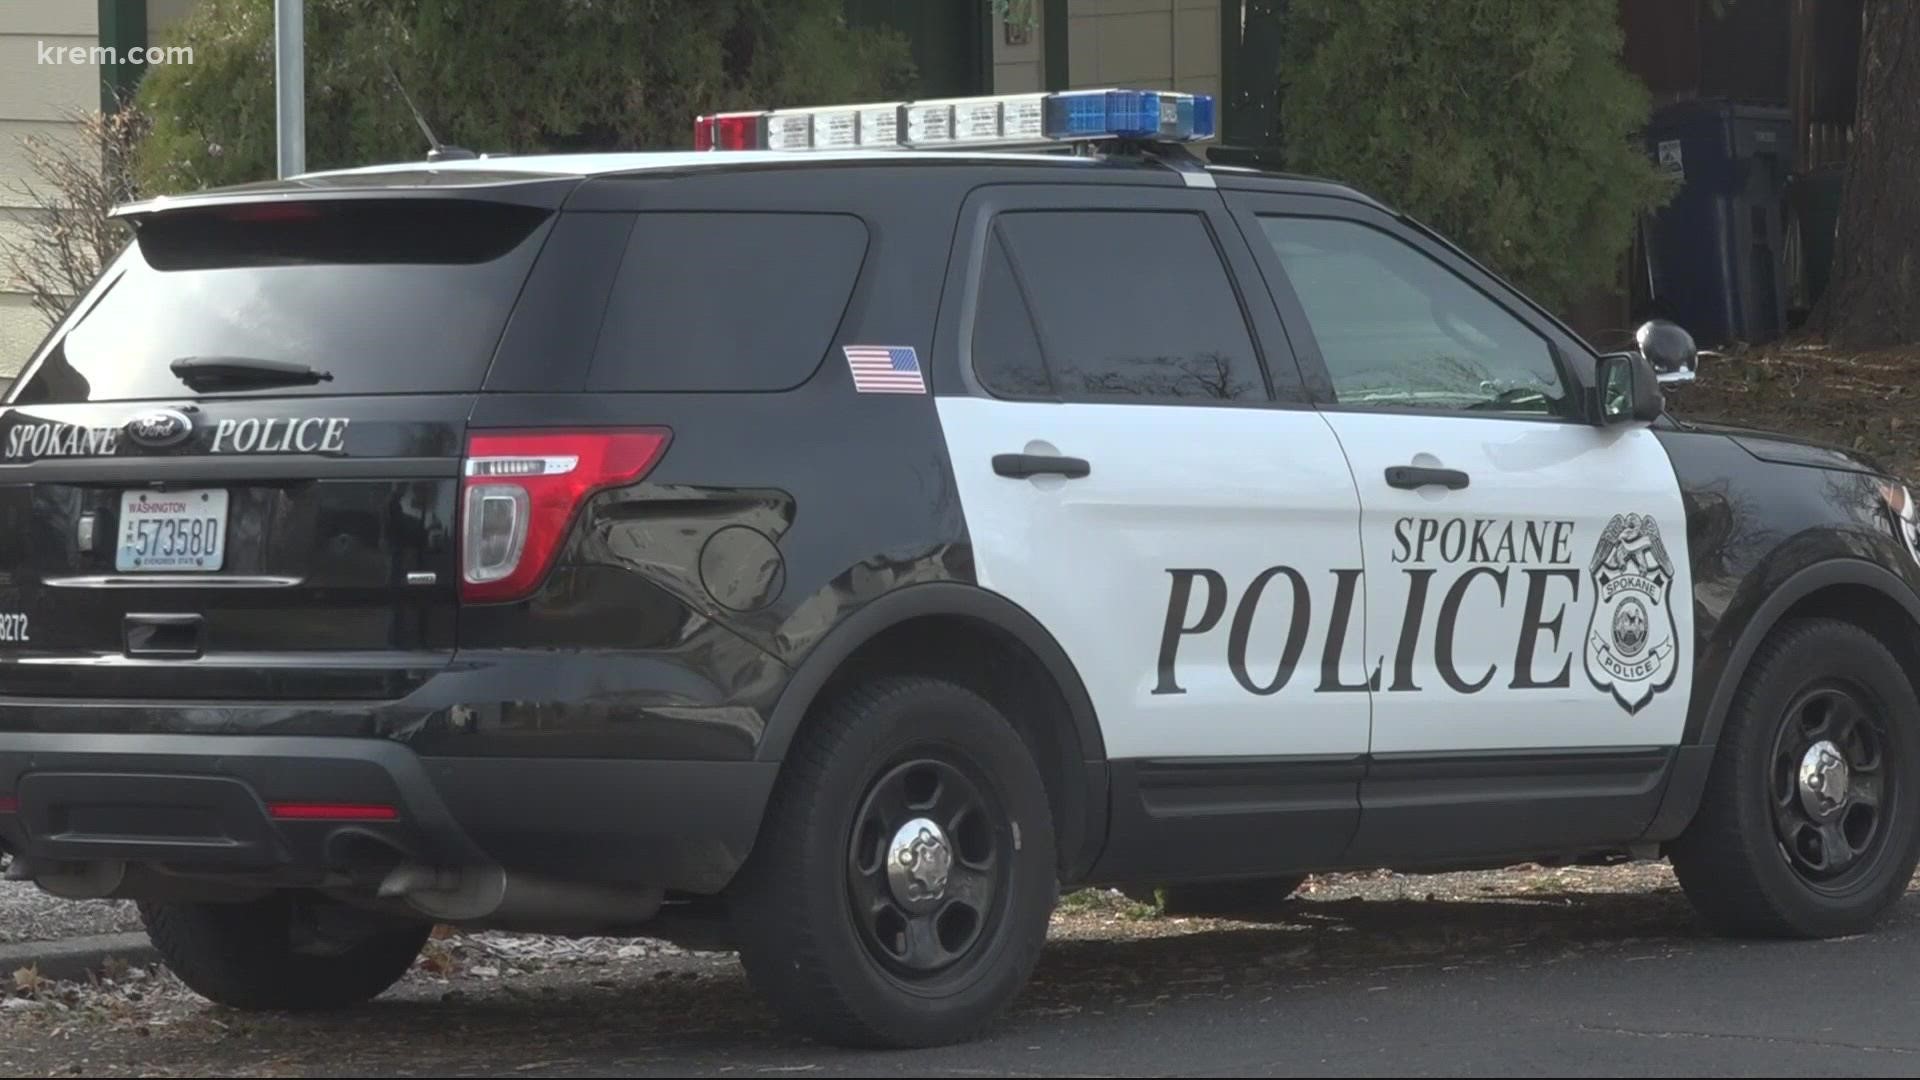 Spokane police responded to five reported shootings, but only four of those shootings were confirmed.